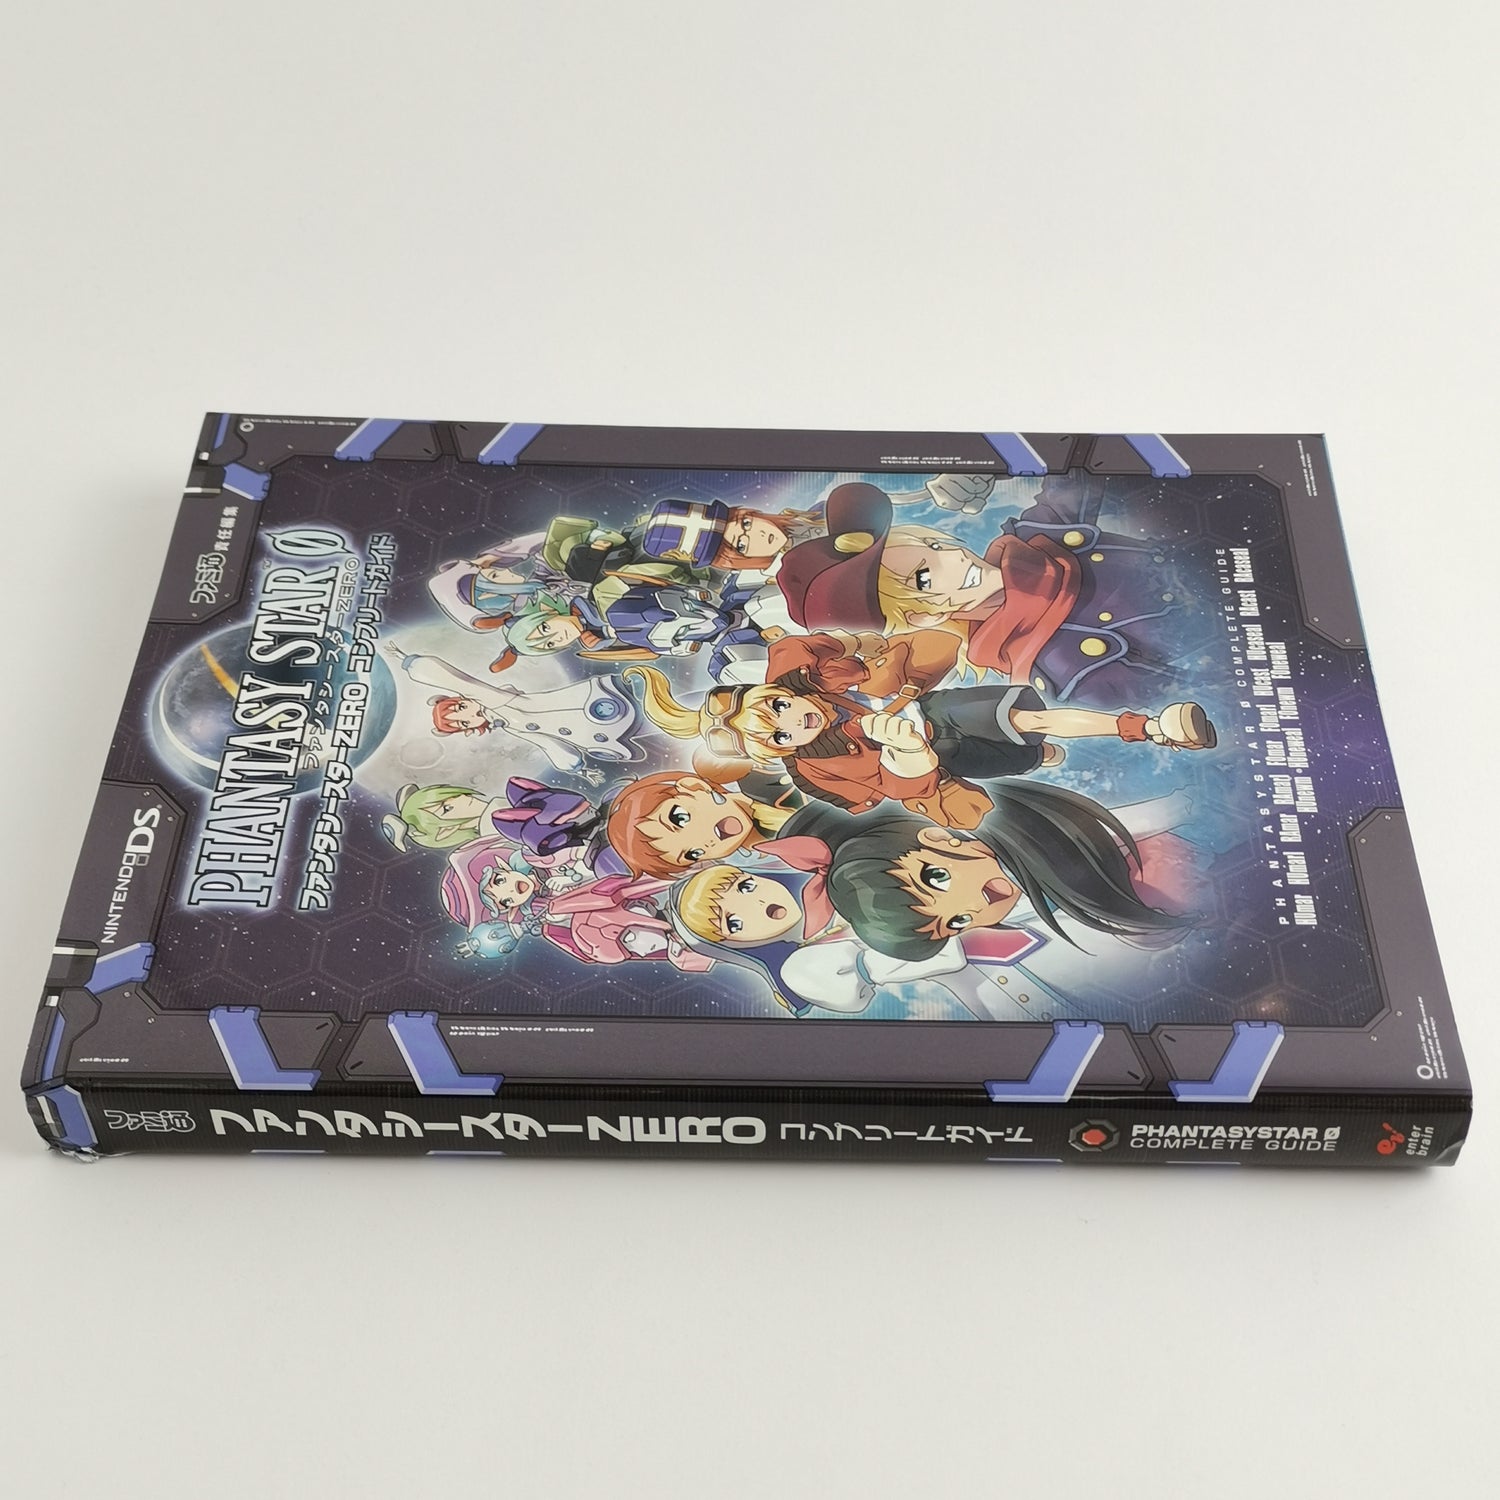 Official Nintendo DS Strategy Guide : Phantasy Star Zero - JAPAN Lösungsbuch